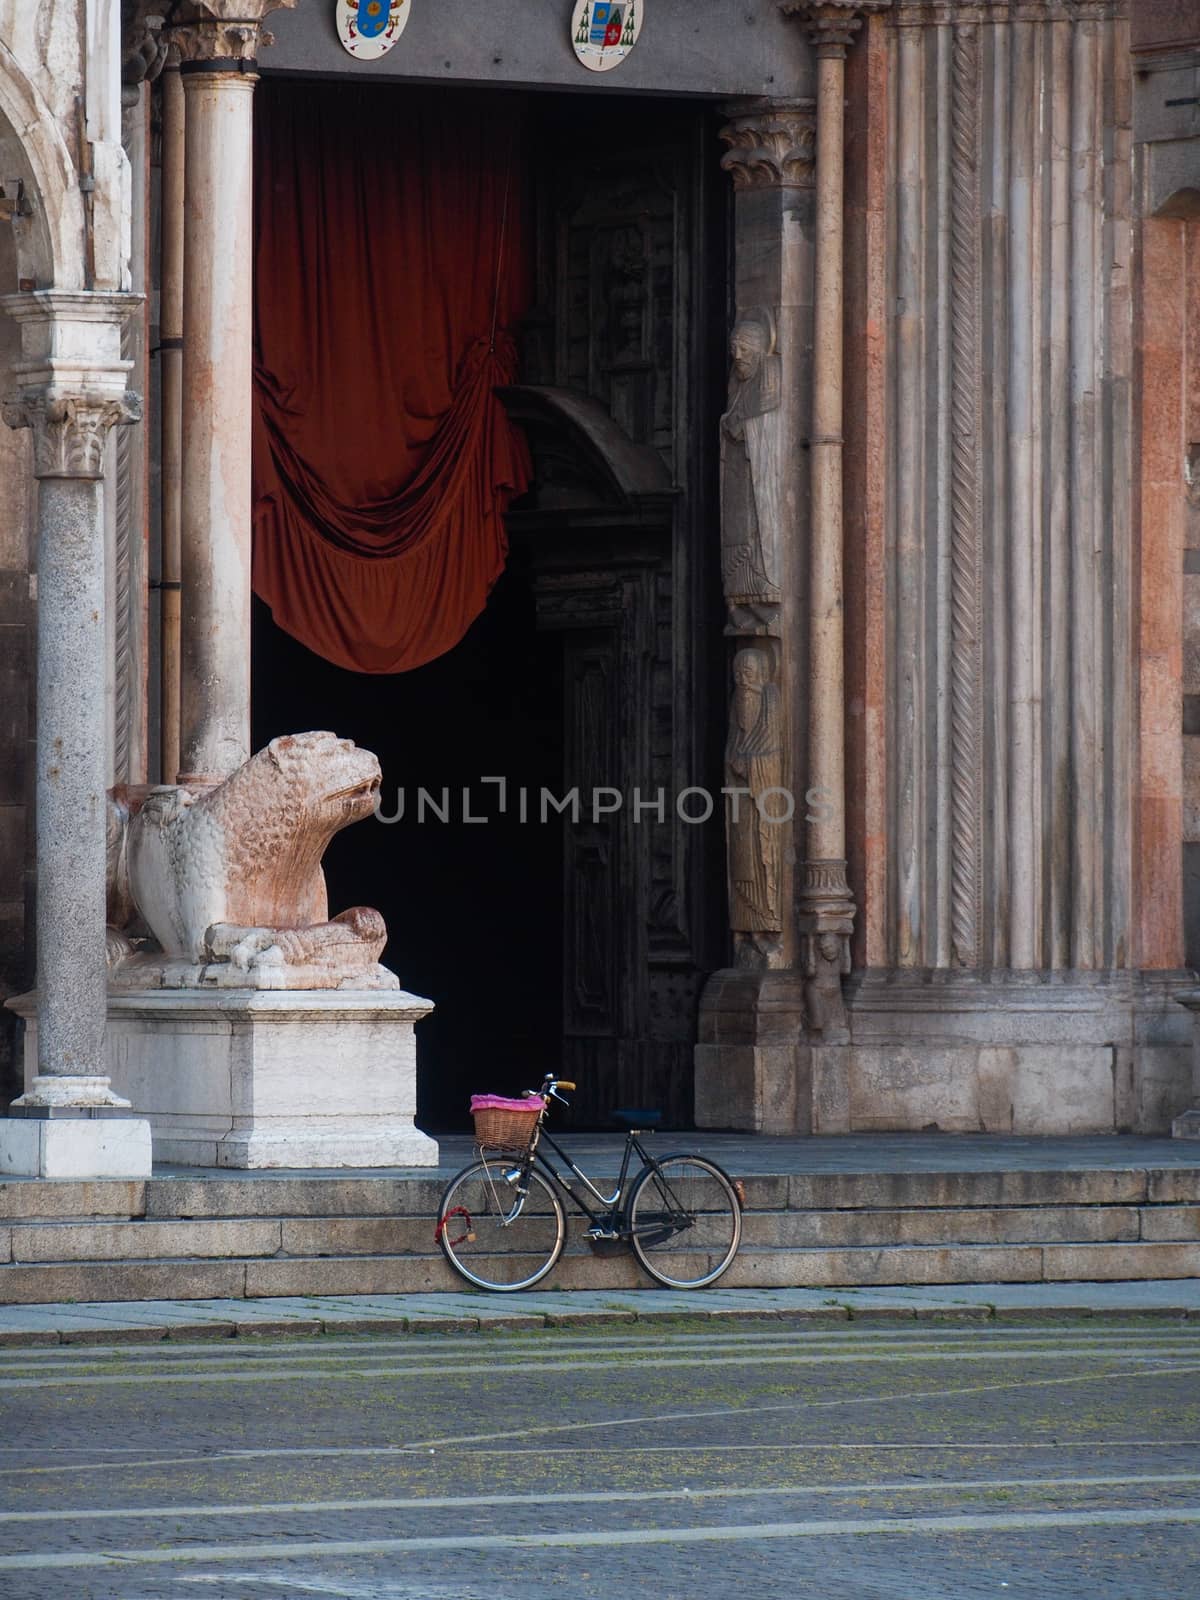 Cremona, Lombardy, Italy - May  5 6 7  2020 - a deserted city  during coronavirus outbreak lockdown phase 2 and economic crisis